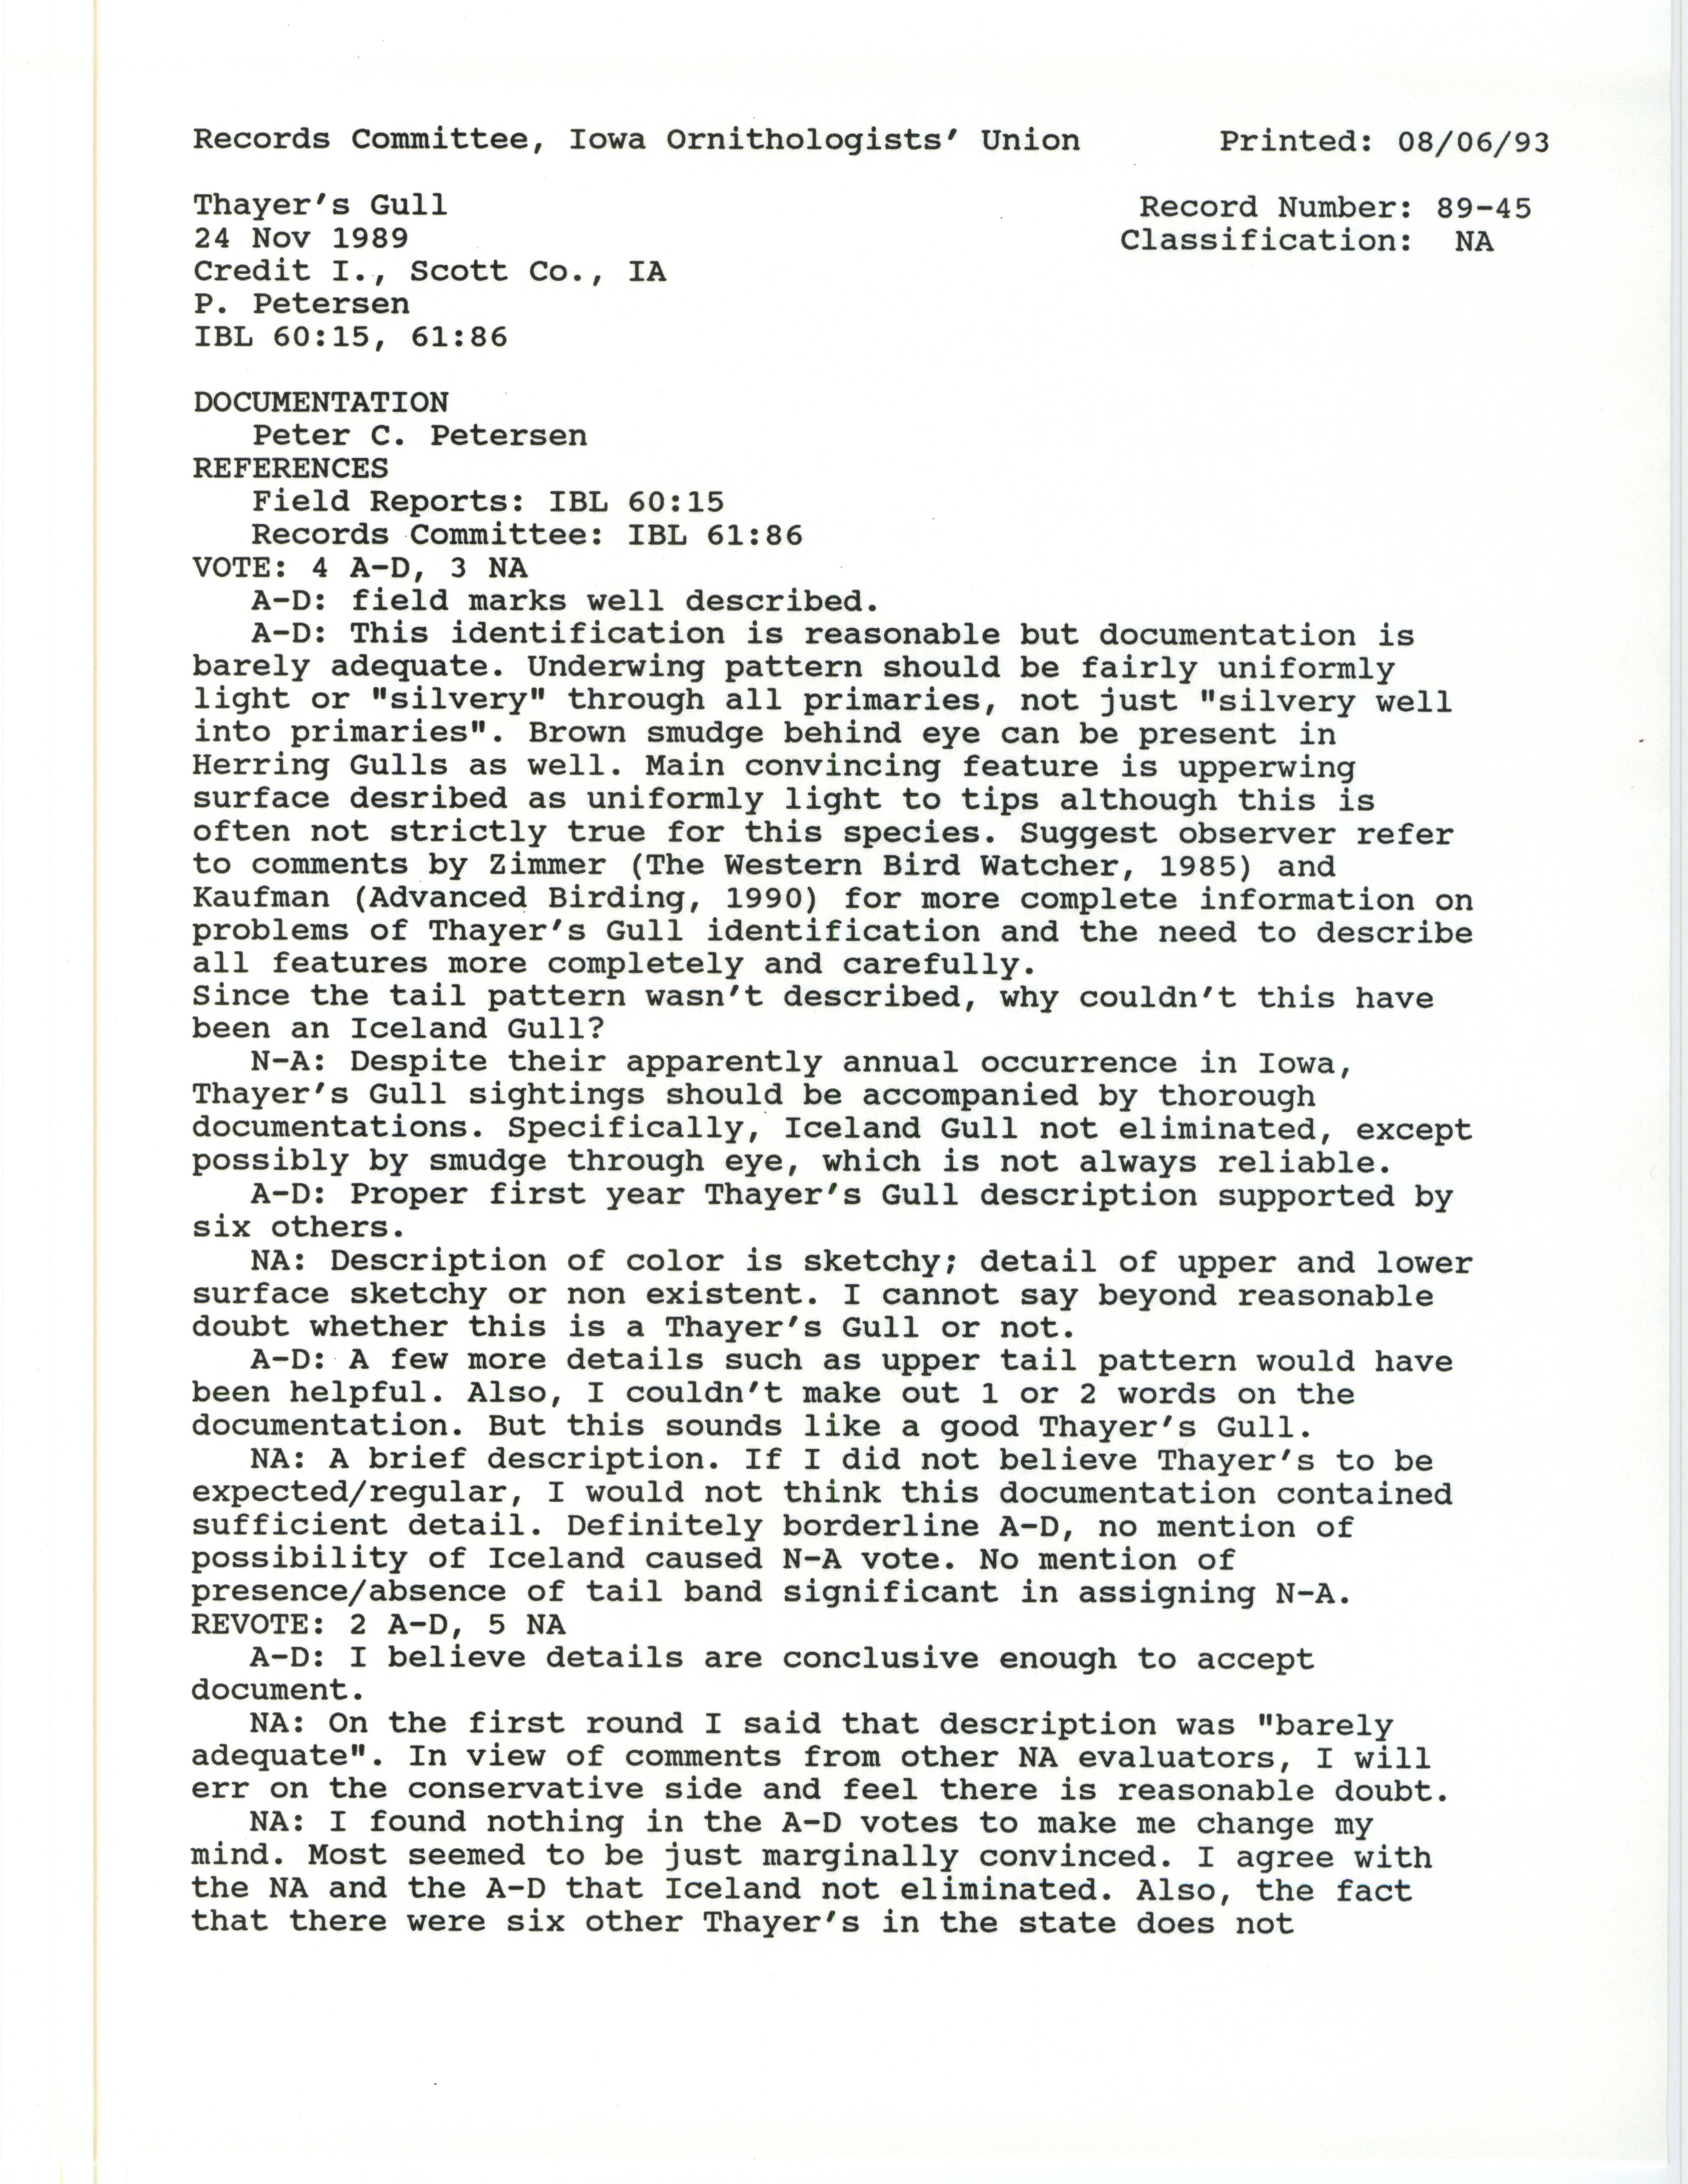 Records Committee review for rare bird sighting of Thayer's Gull at Credit Island, 1989